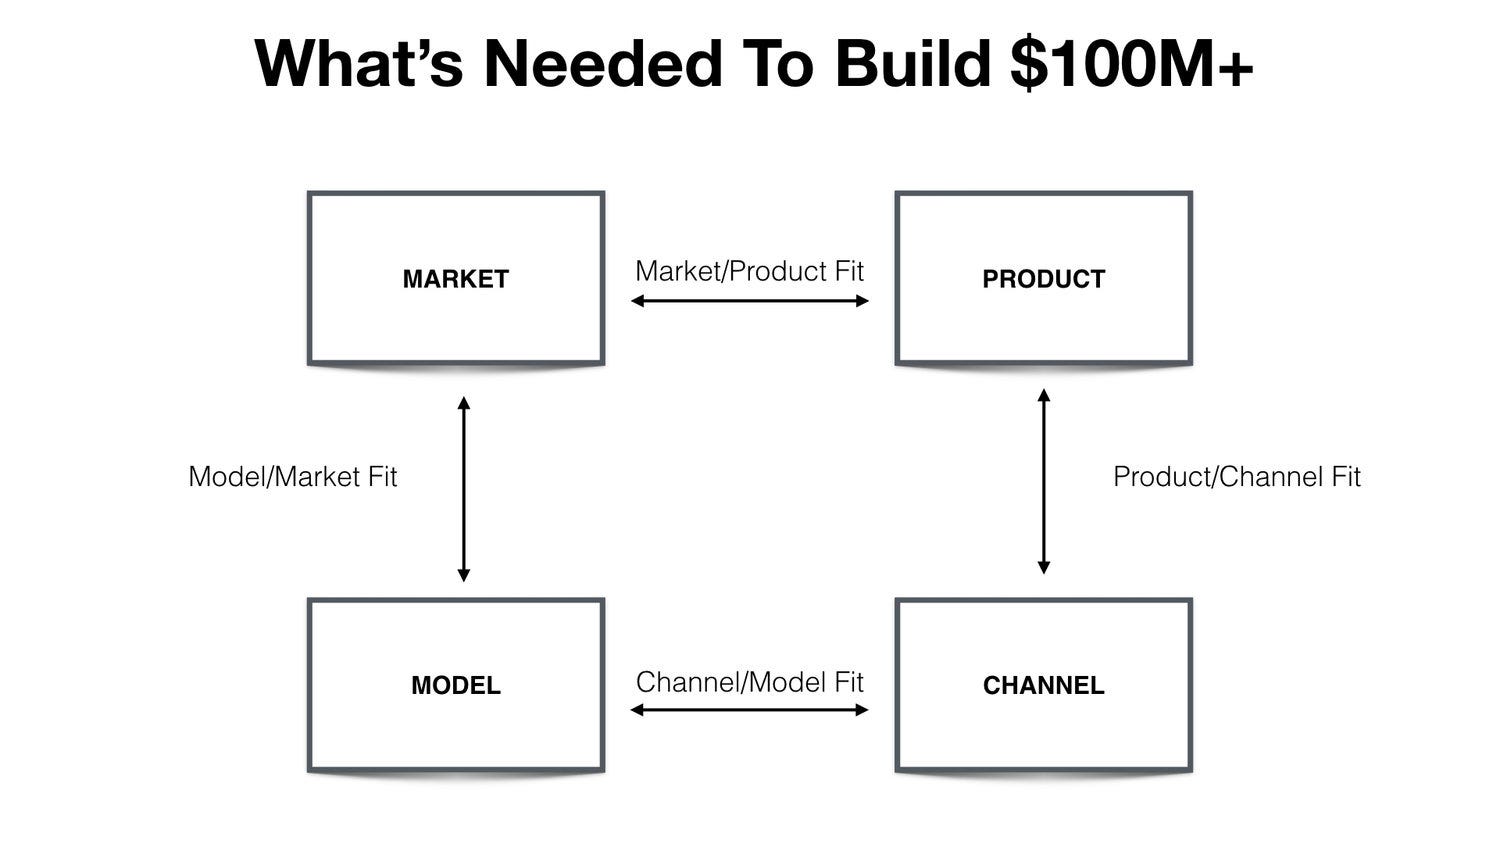 If You Invested $100 in Roblox's IPO, This Is How Much Money You'd